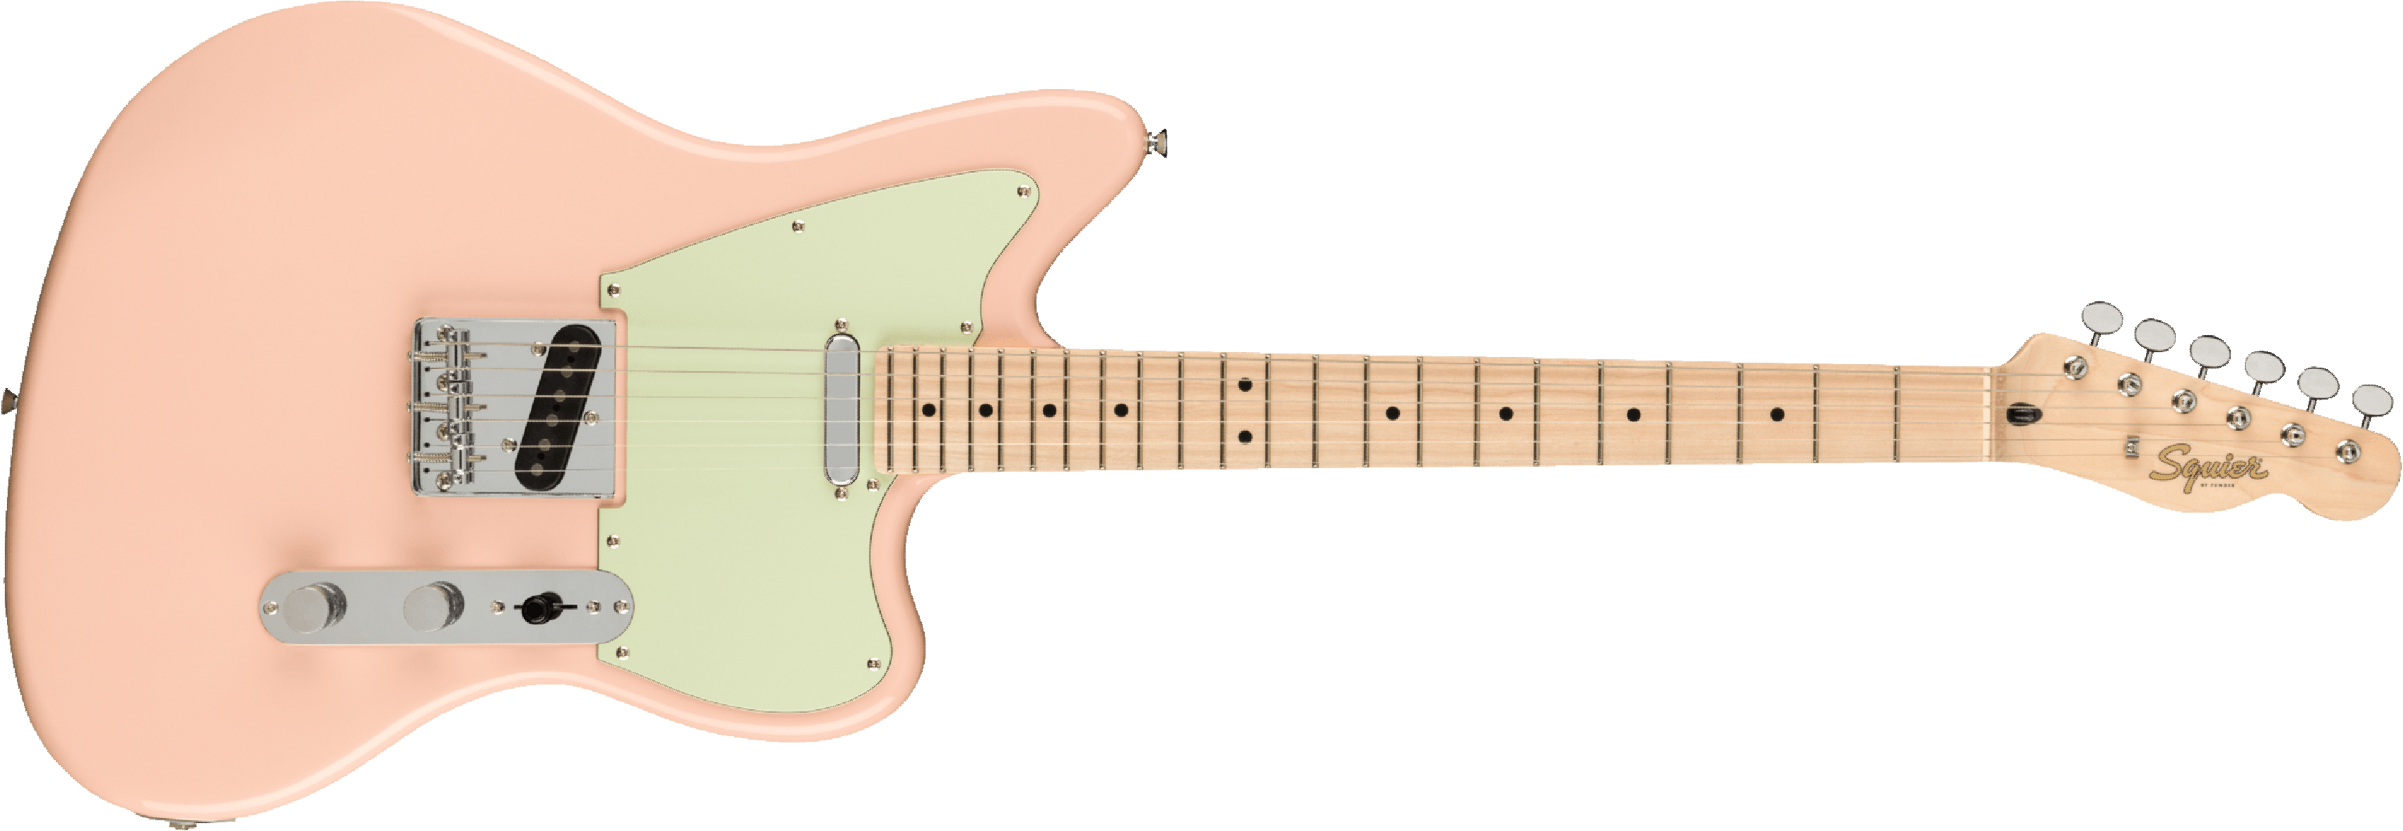 Squier Tele Offset Paranormal Ss Ht Mn - Shell Pink - Guitarra electrica retro rock - Main picture